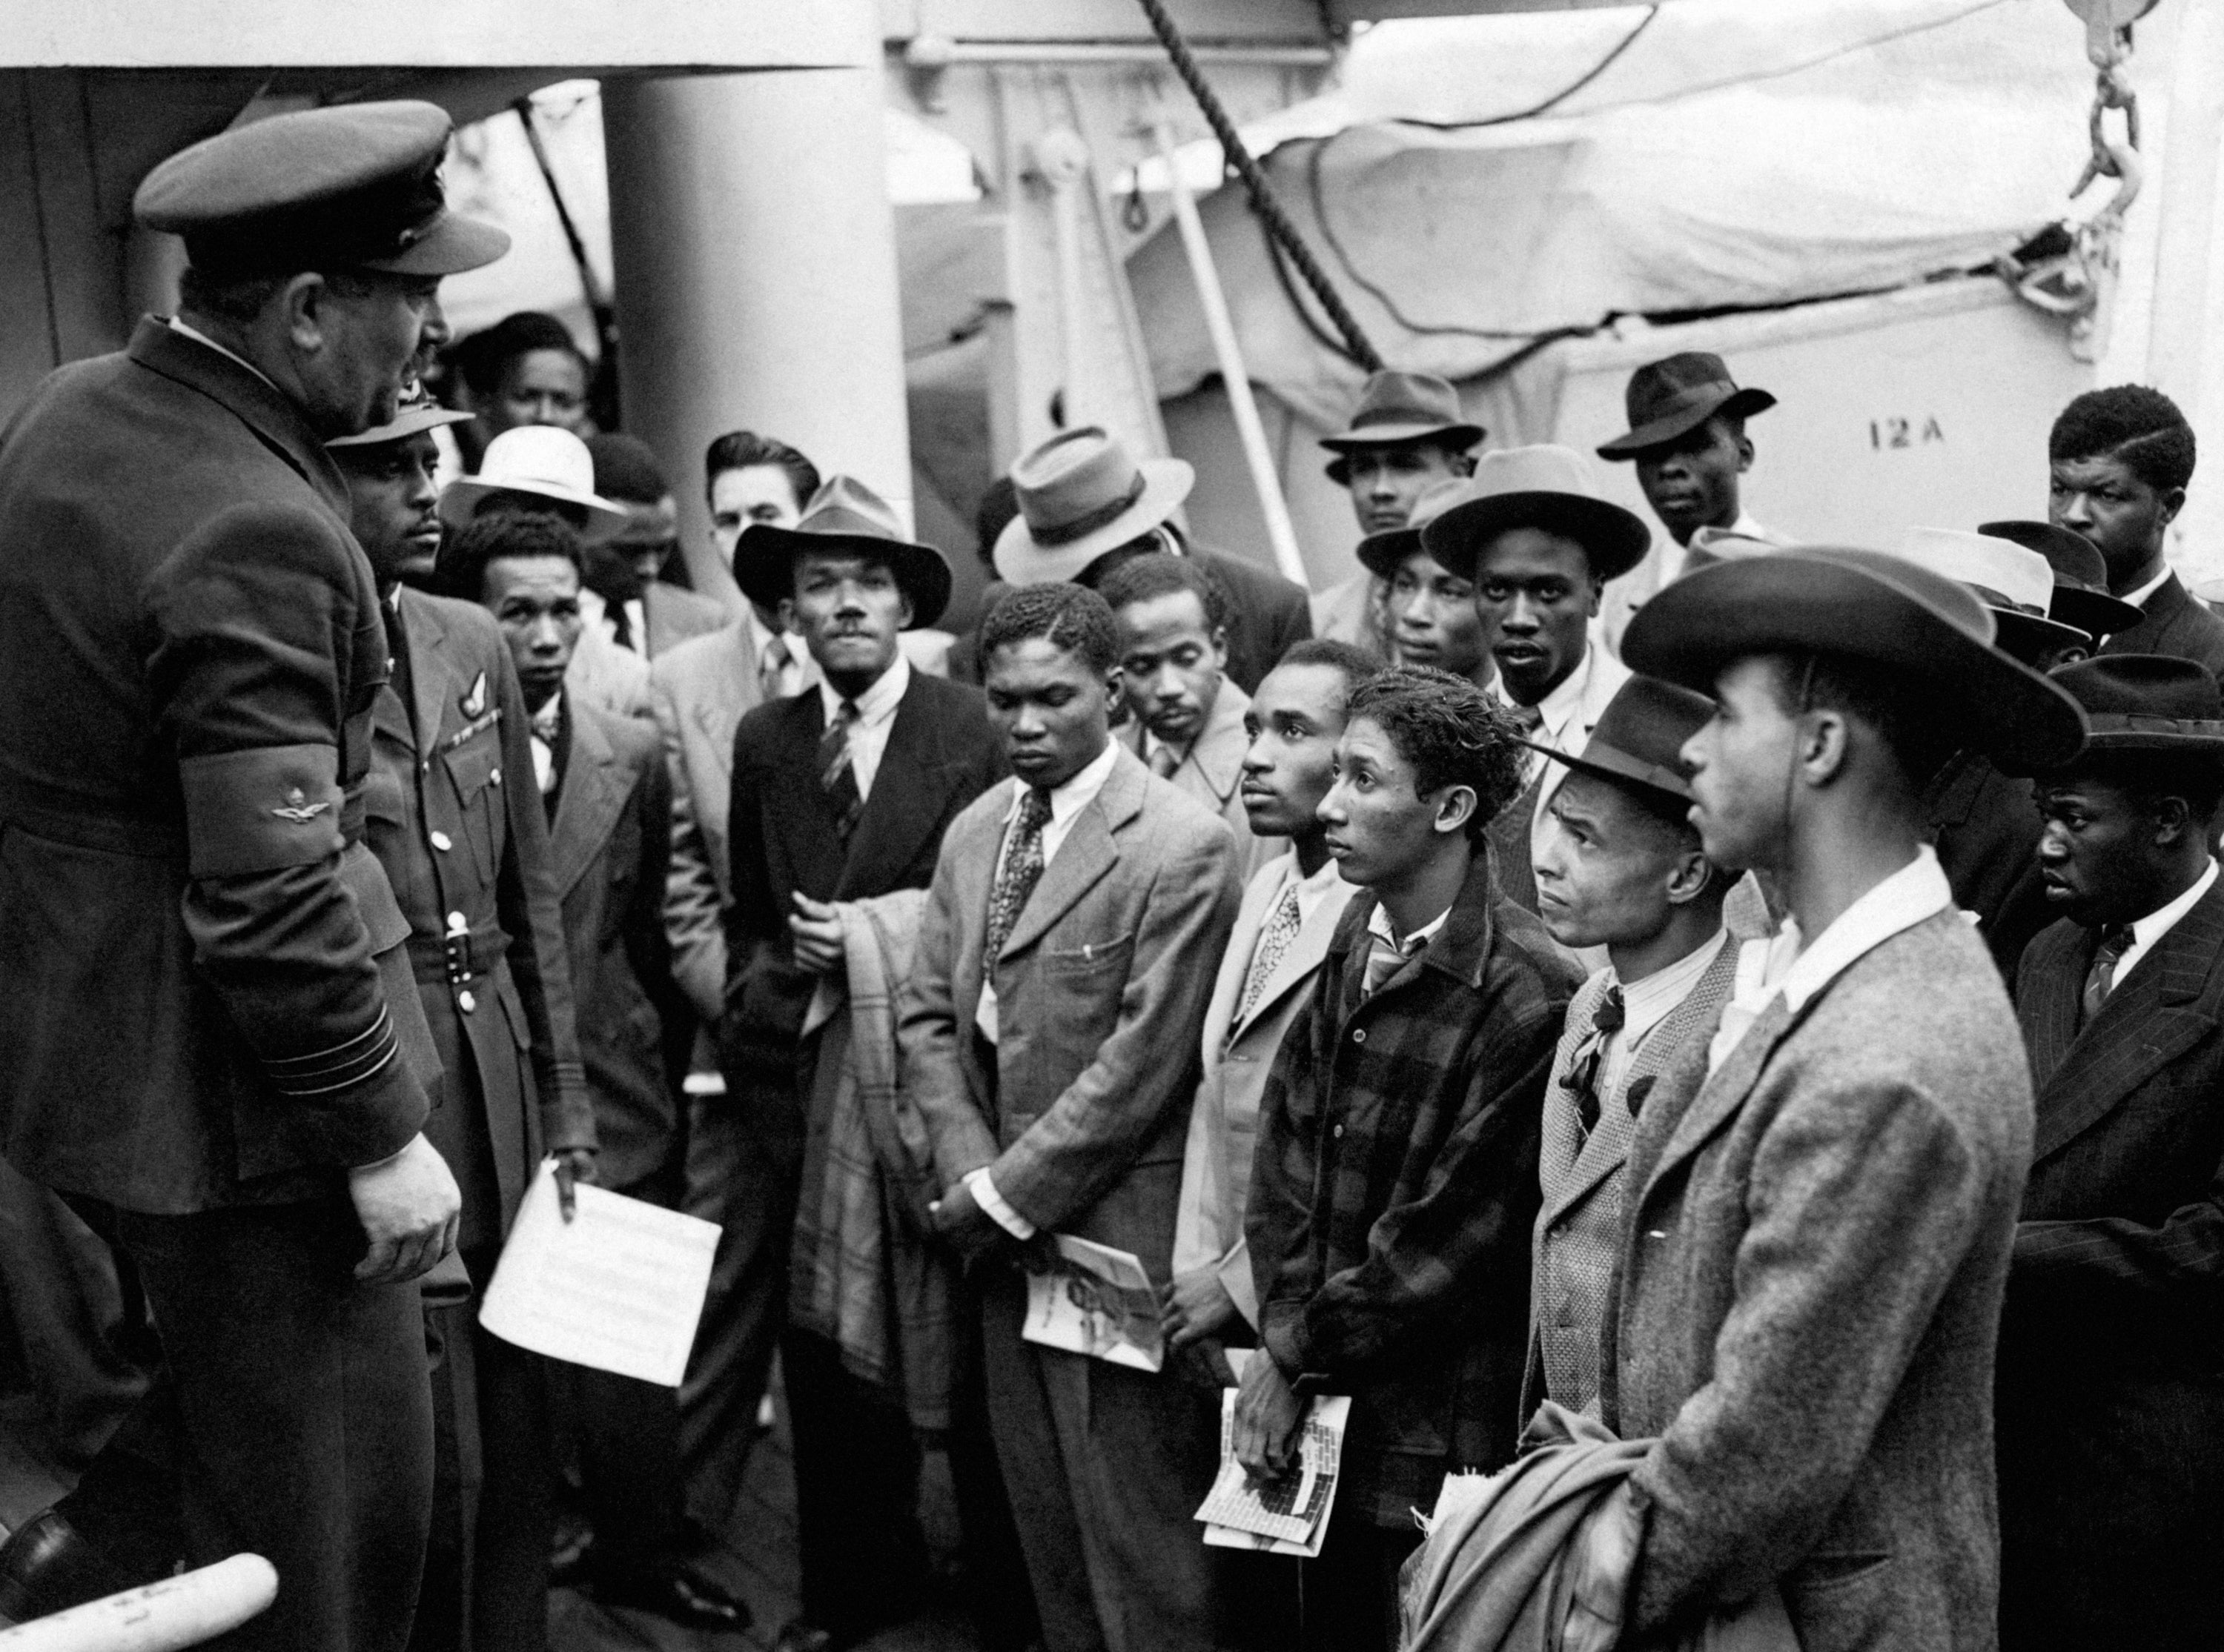 Jamaican immigrants welcomed by RAF officials from the Colonial Office after the ex-troopship HMT ‘Empire Windrush’ landed them at Tilbury